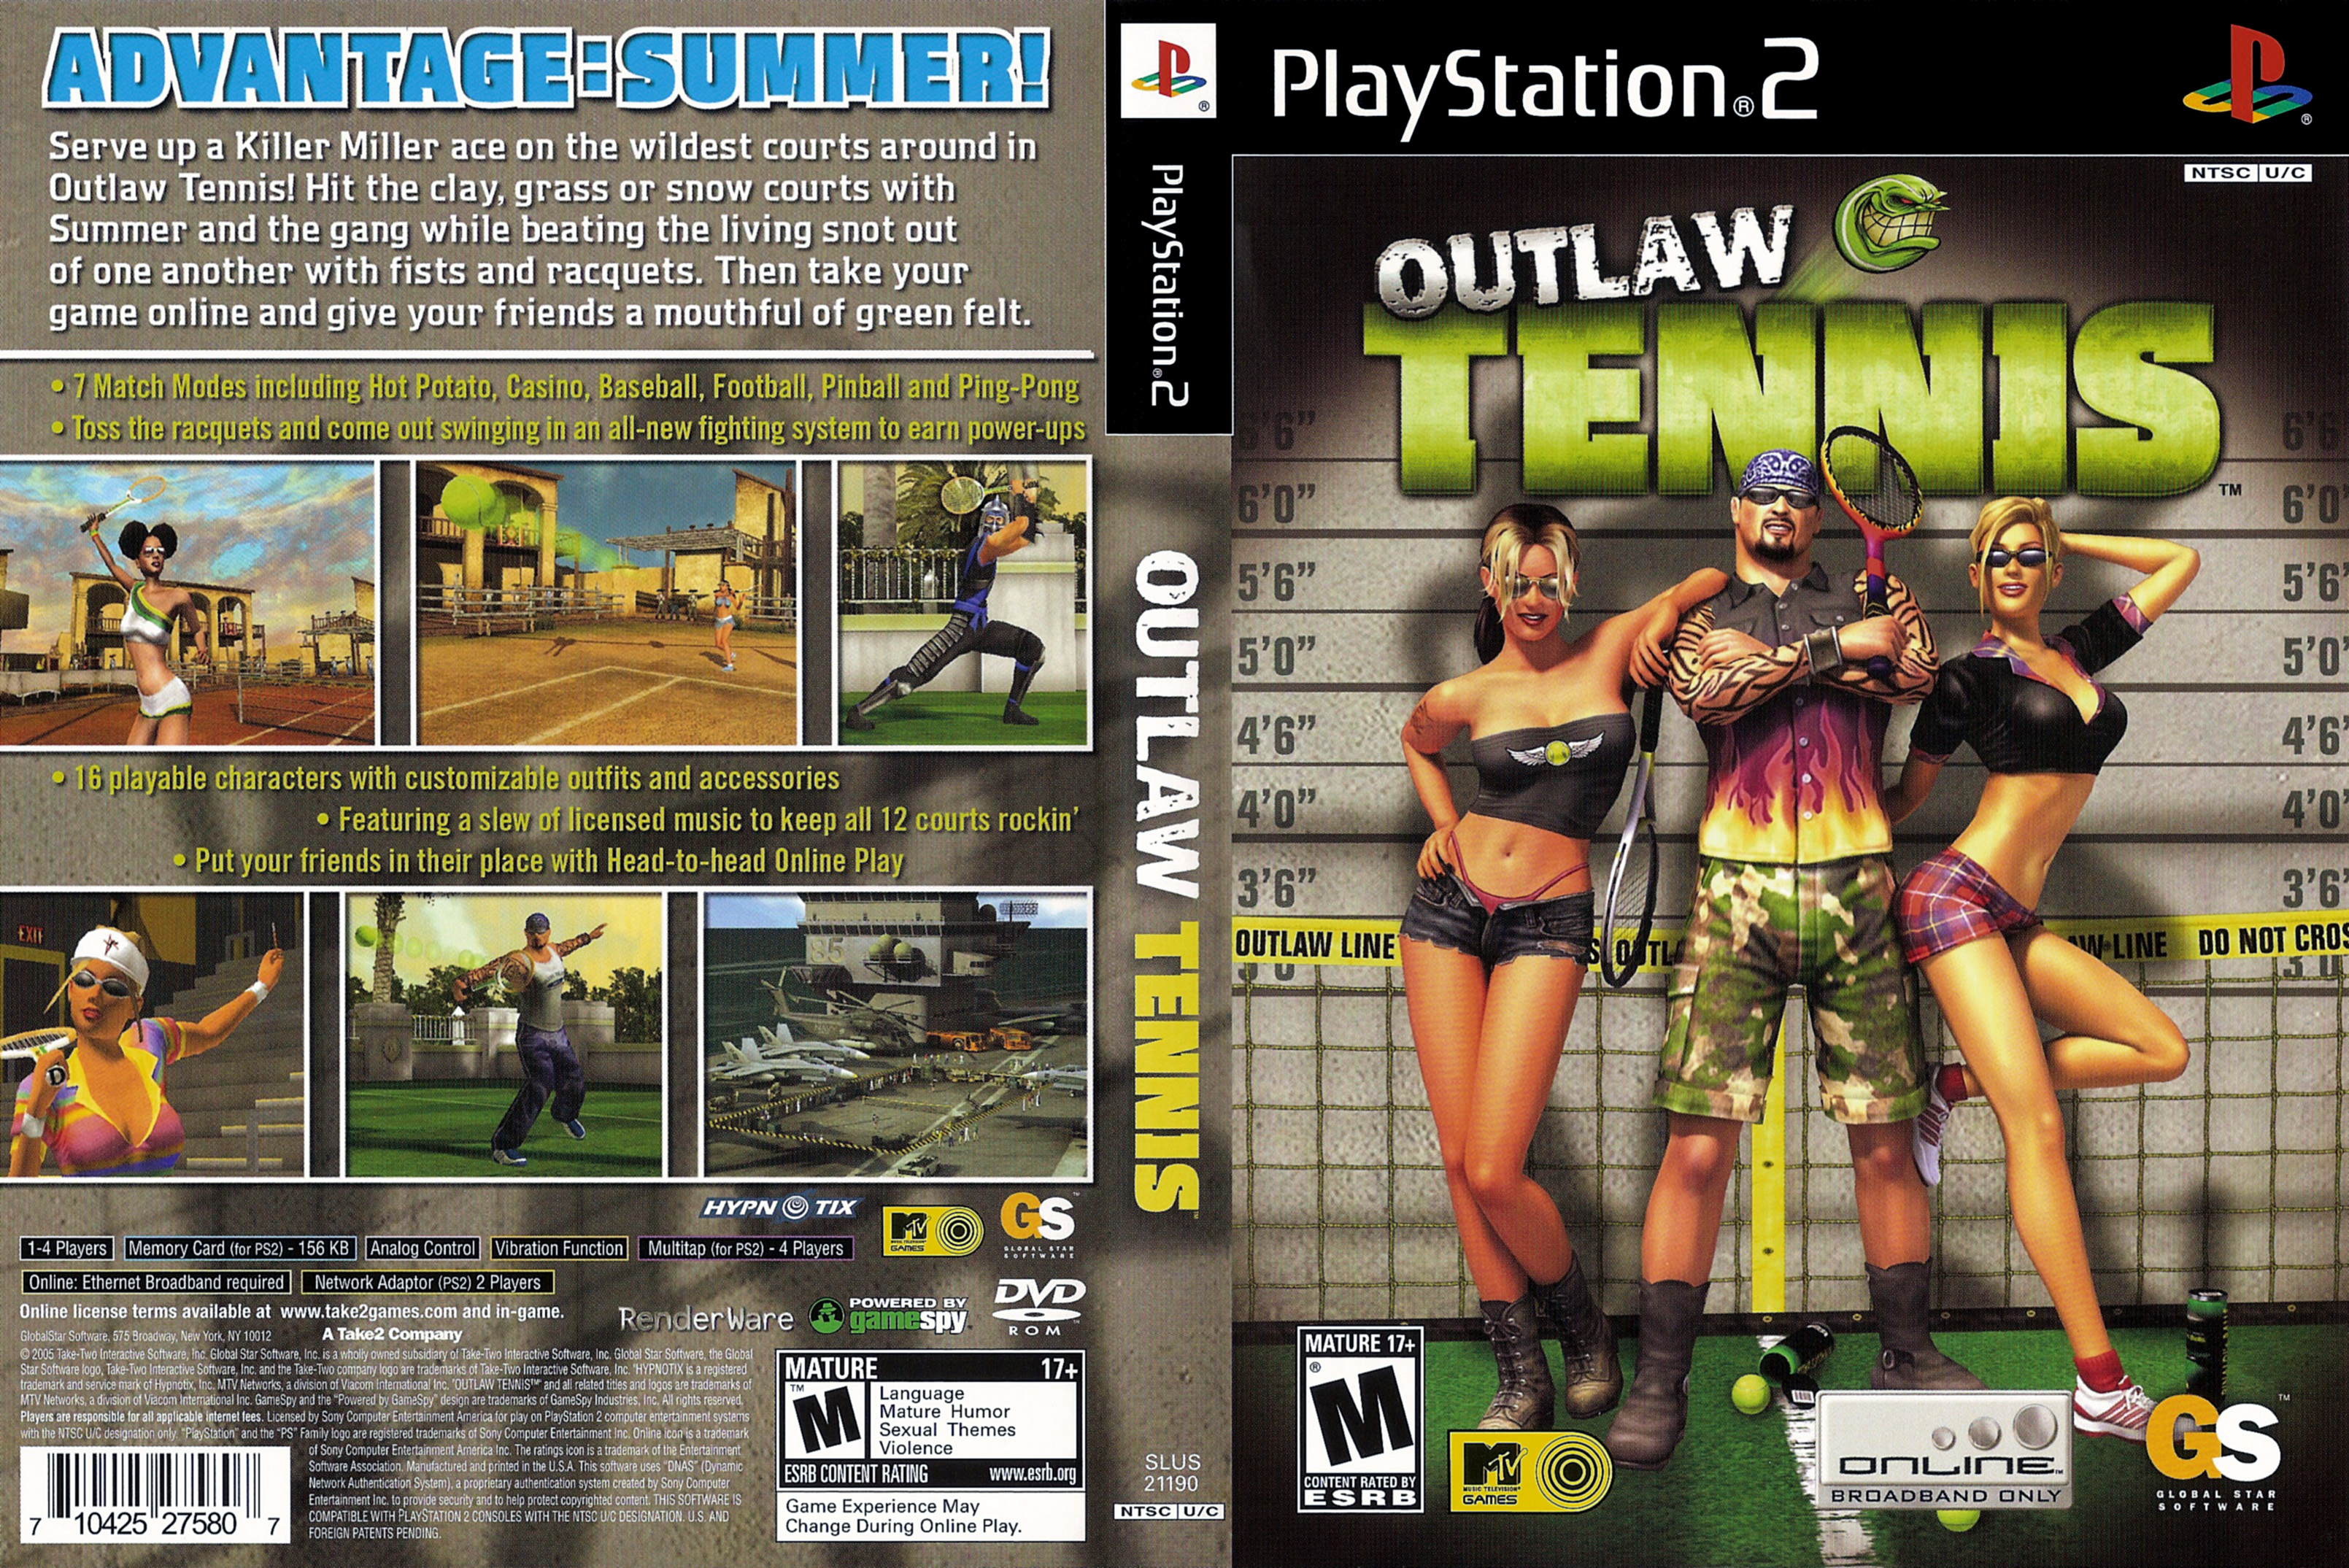 Outlaw Tennis PS2 cover.